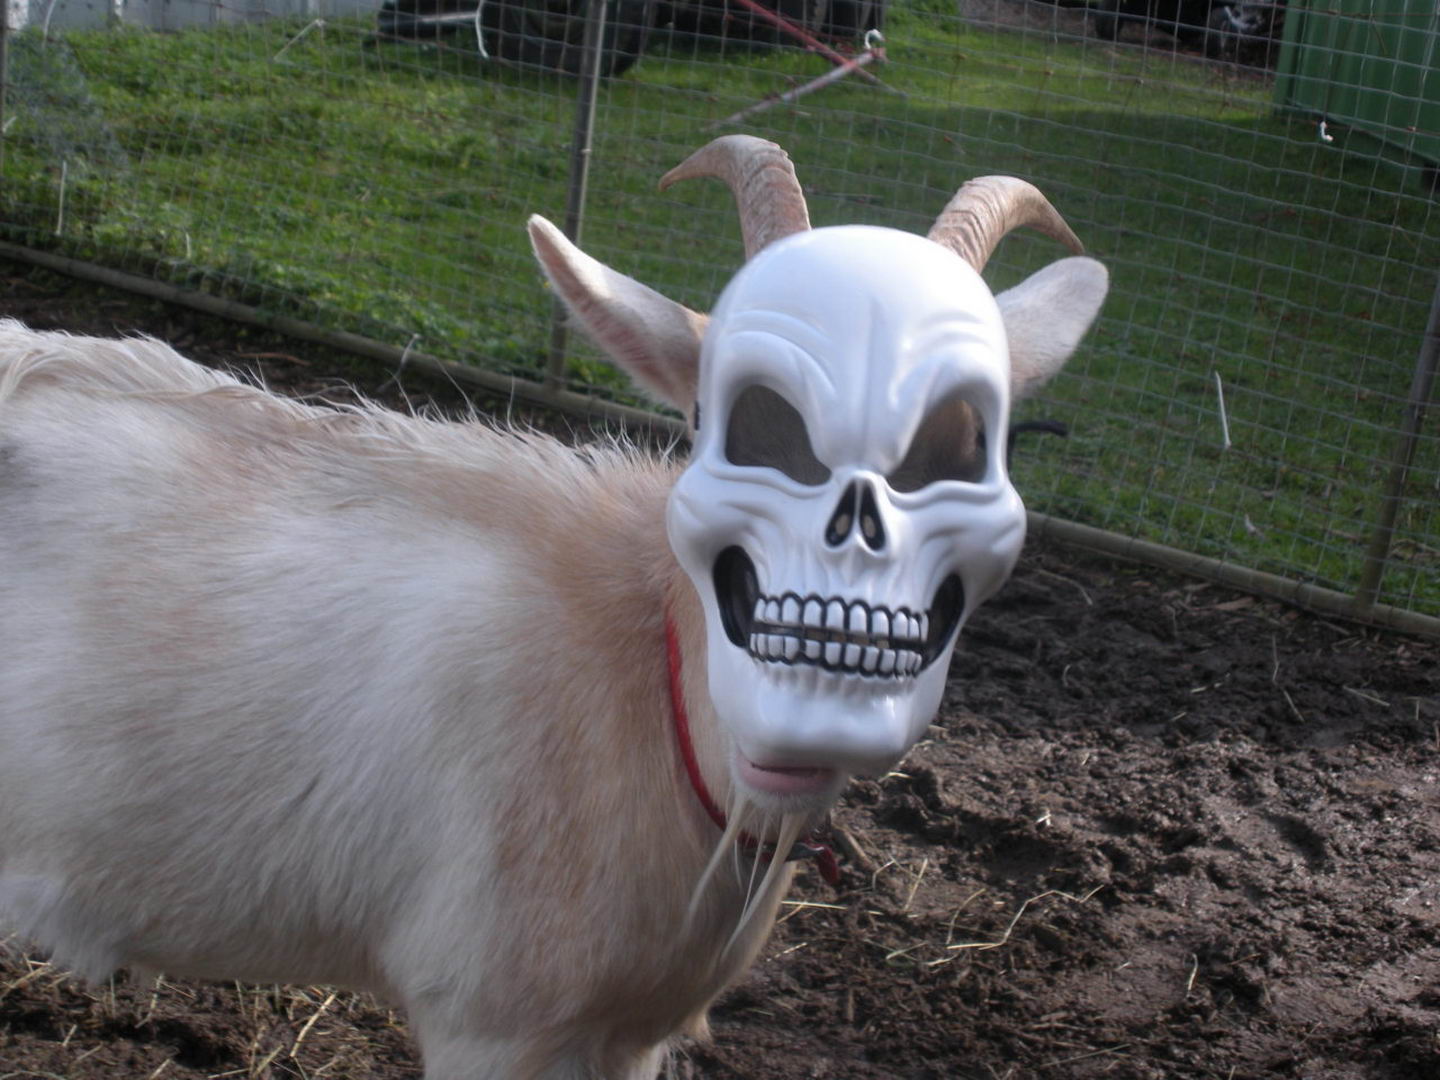 remarkable image of a goat wearing a skull mask